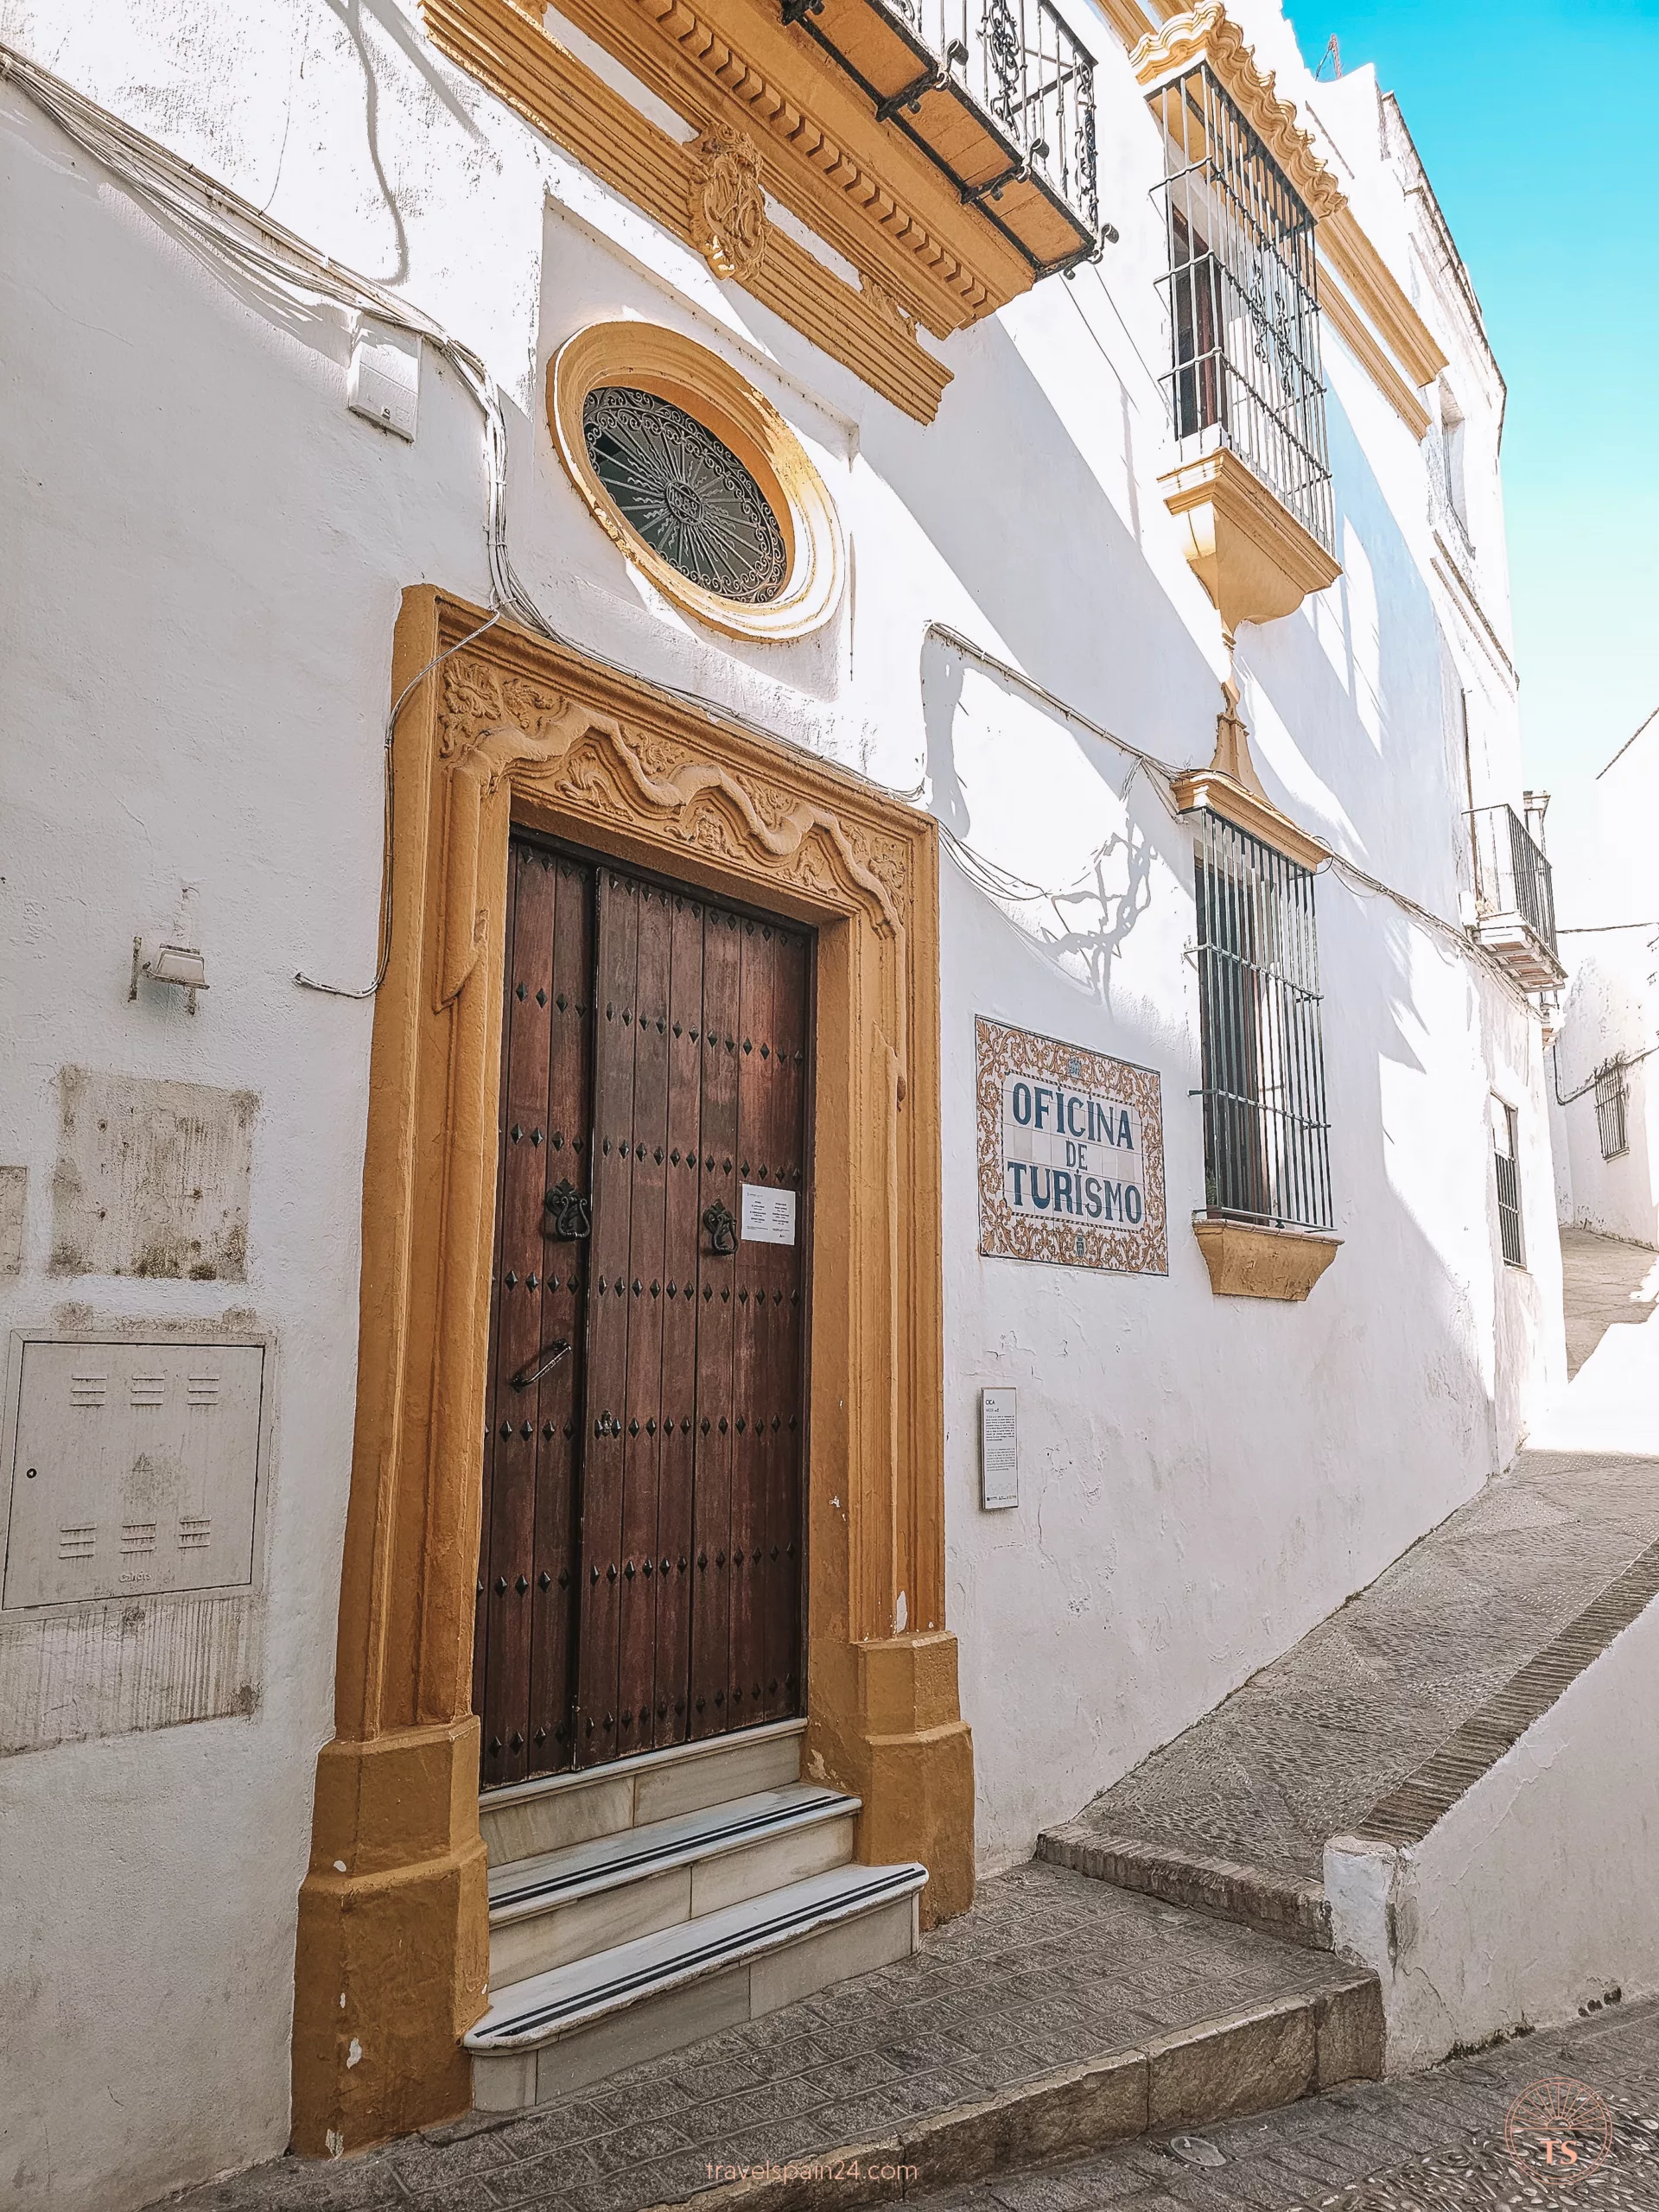 Tourism Office of Arcos de la Frontera. The entrance is a large wooden door surrounded by orange trim, set into white walls. 'Oficina de Turismo' is written on the wall.